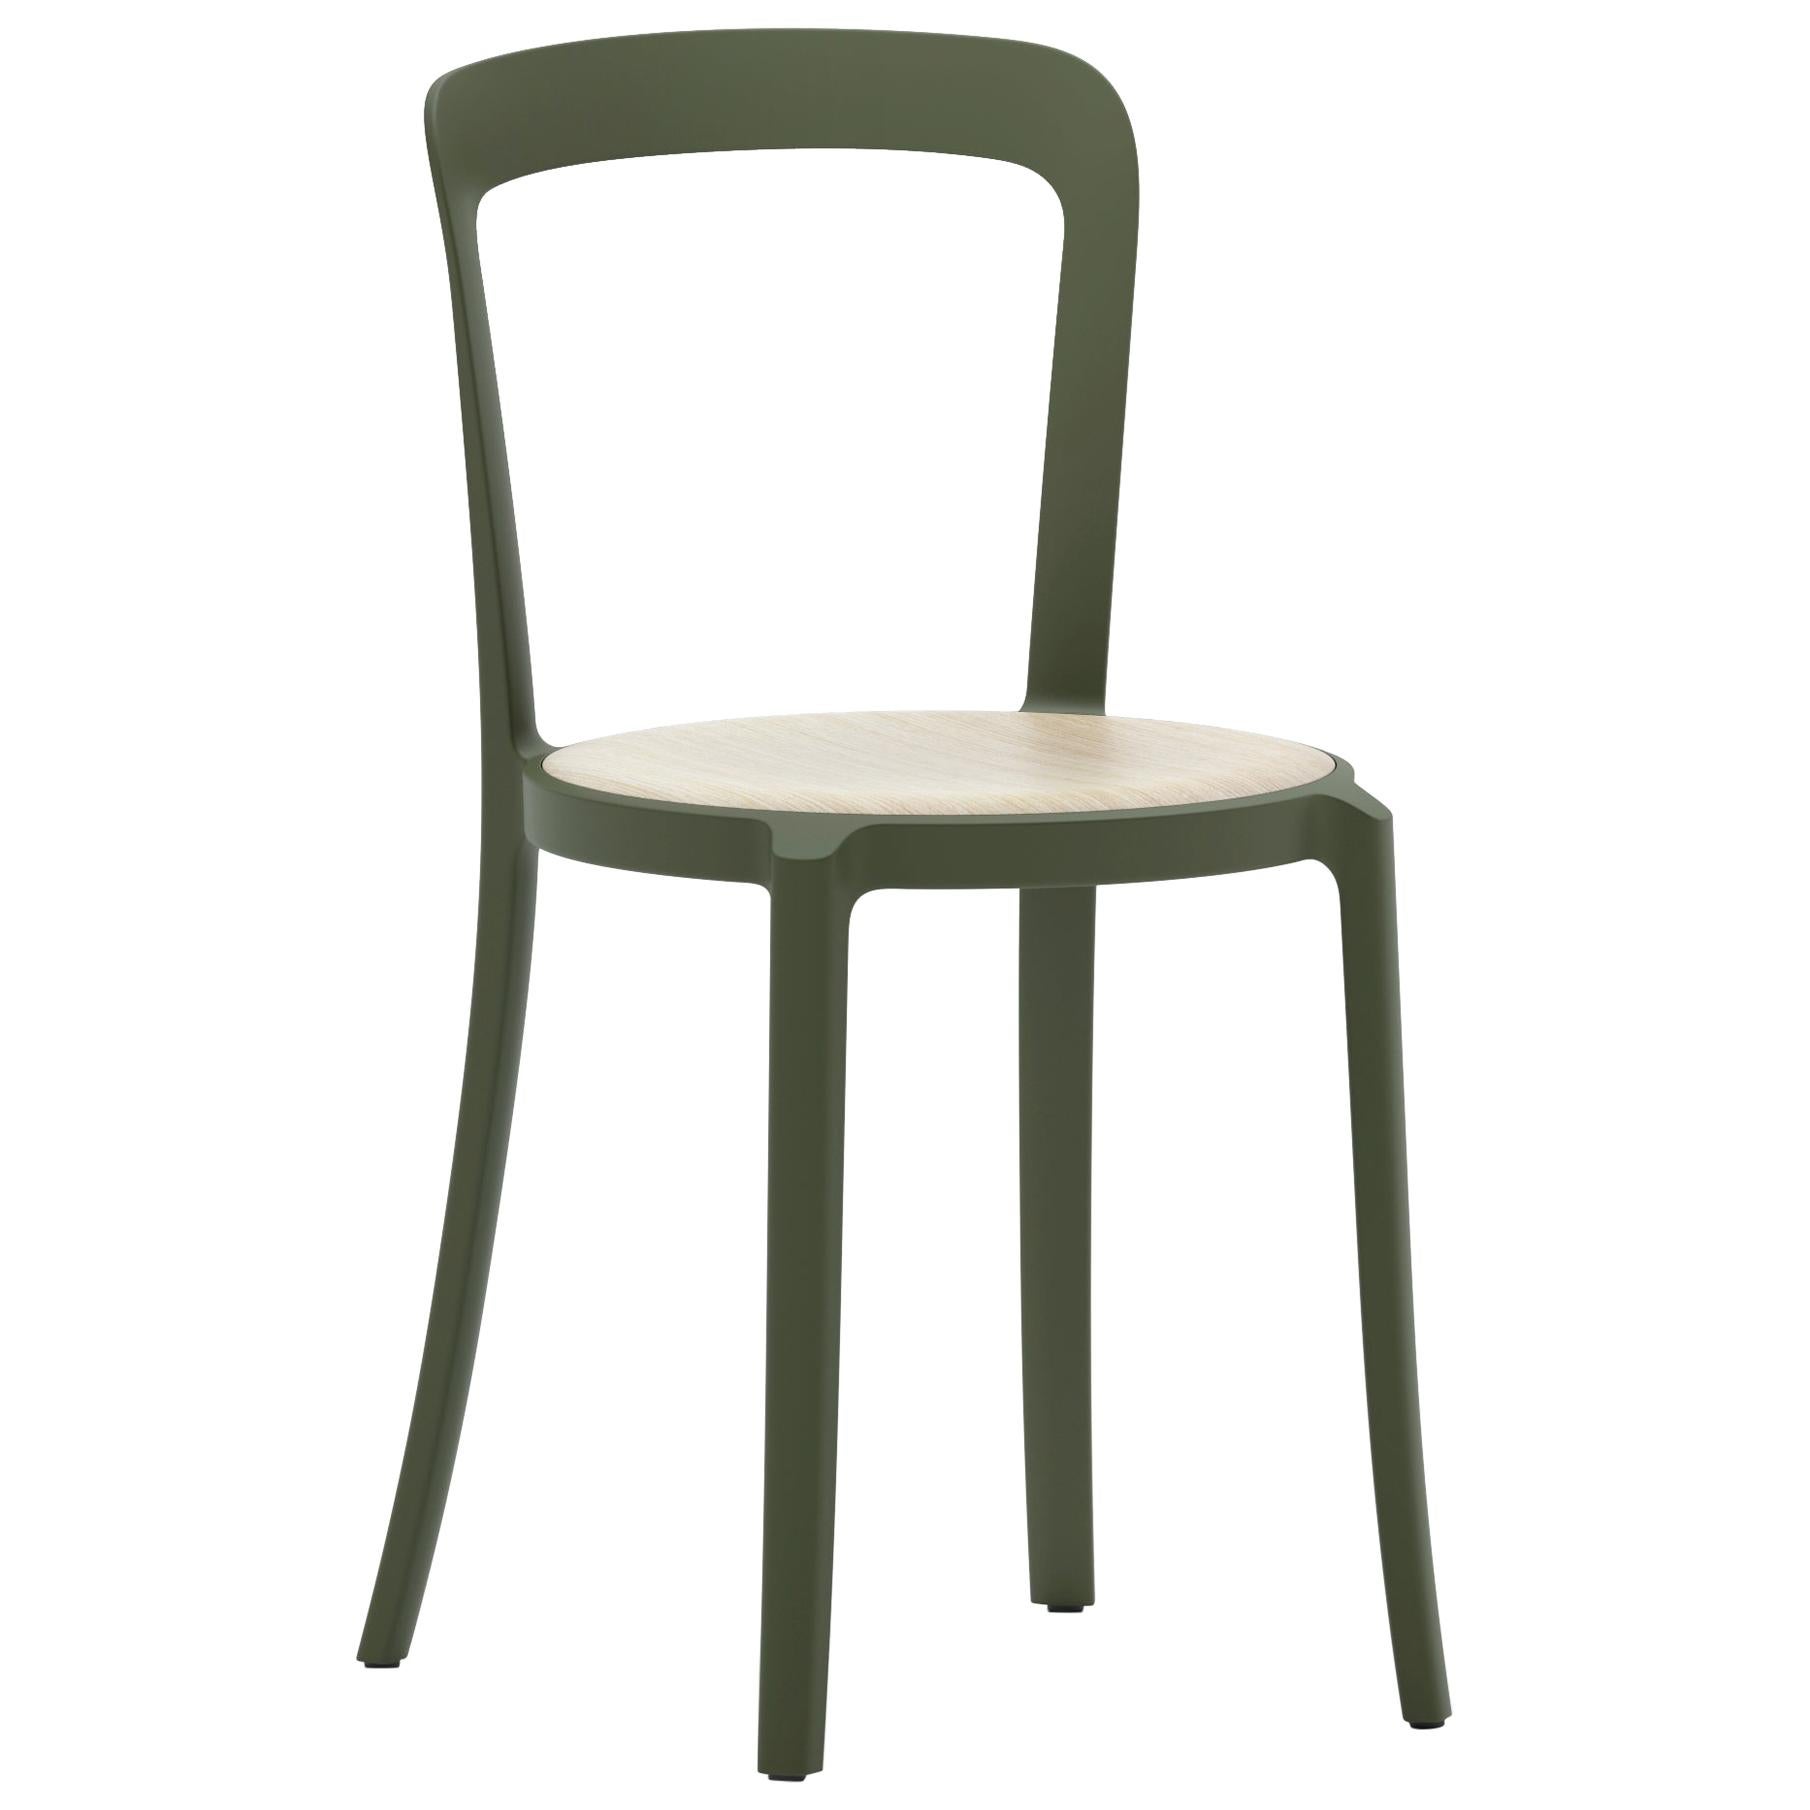 Emeco On & On Stacking Chair in Green with Oak Plywood seat by Barber & Osgerby